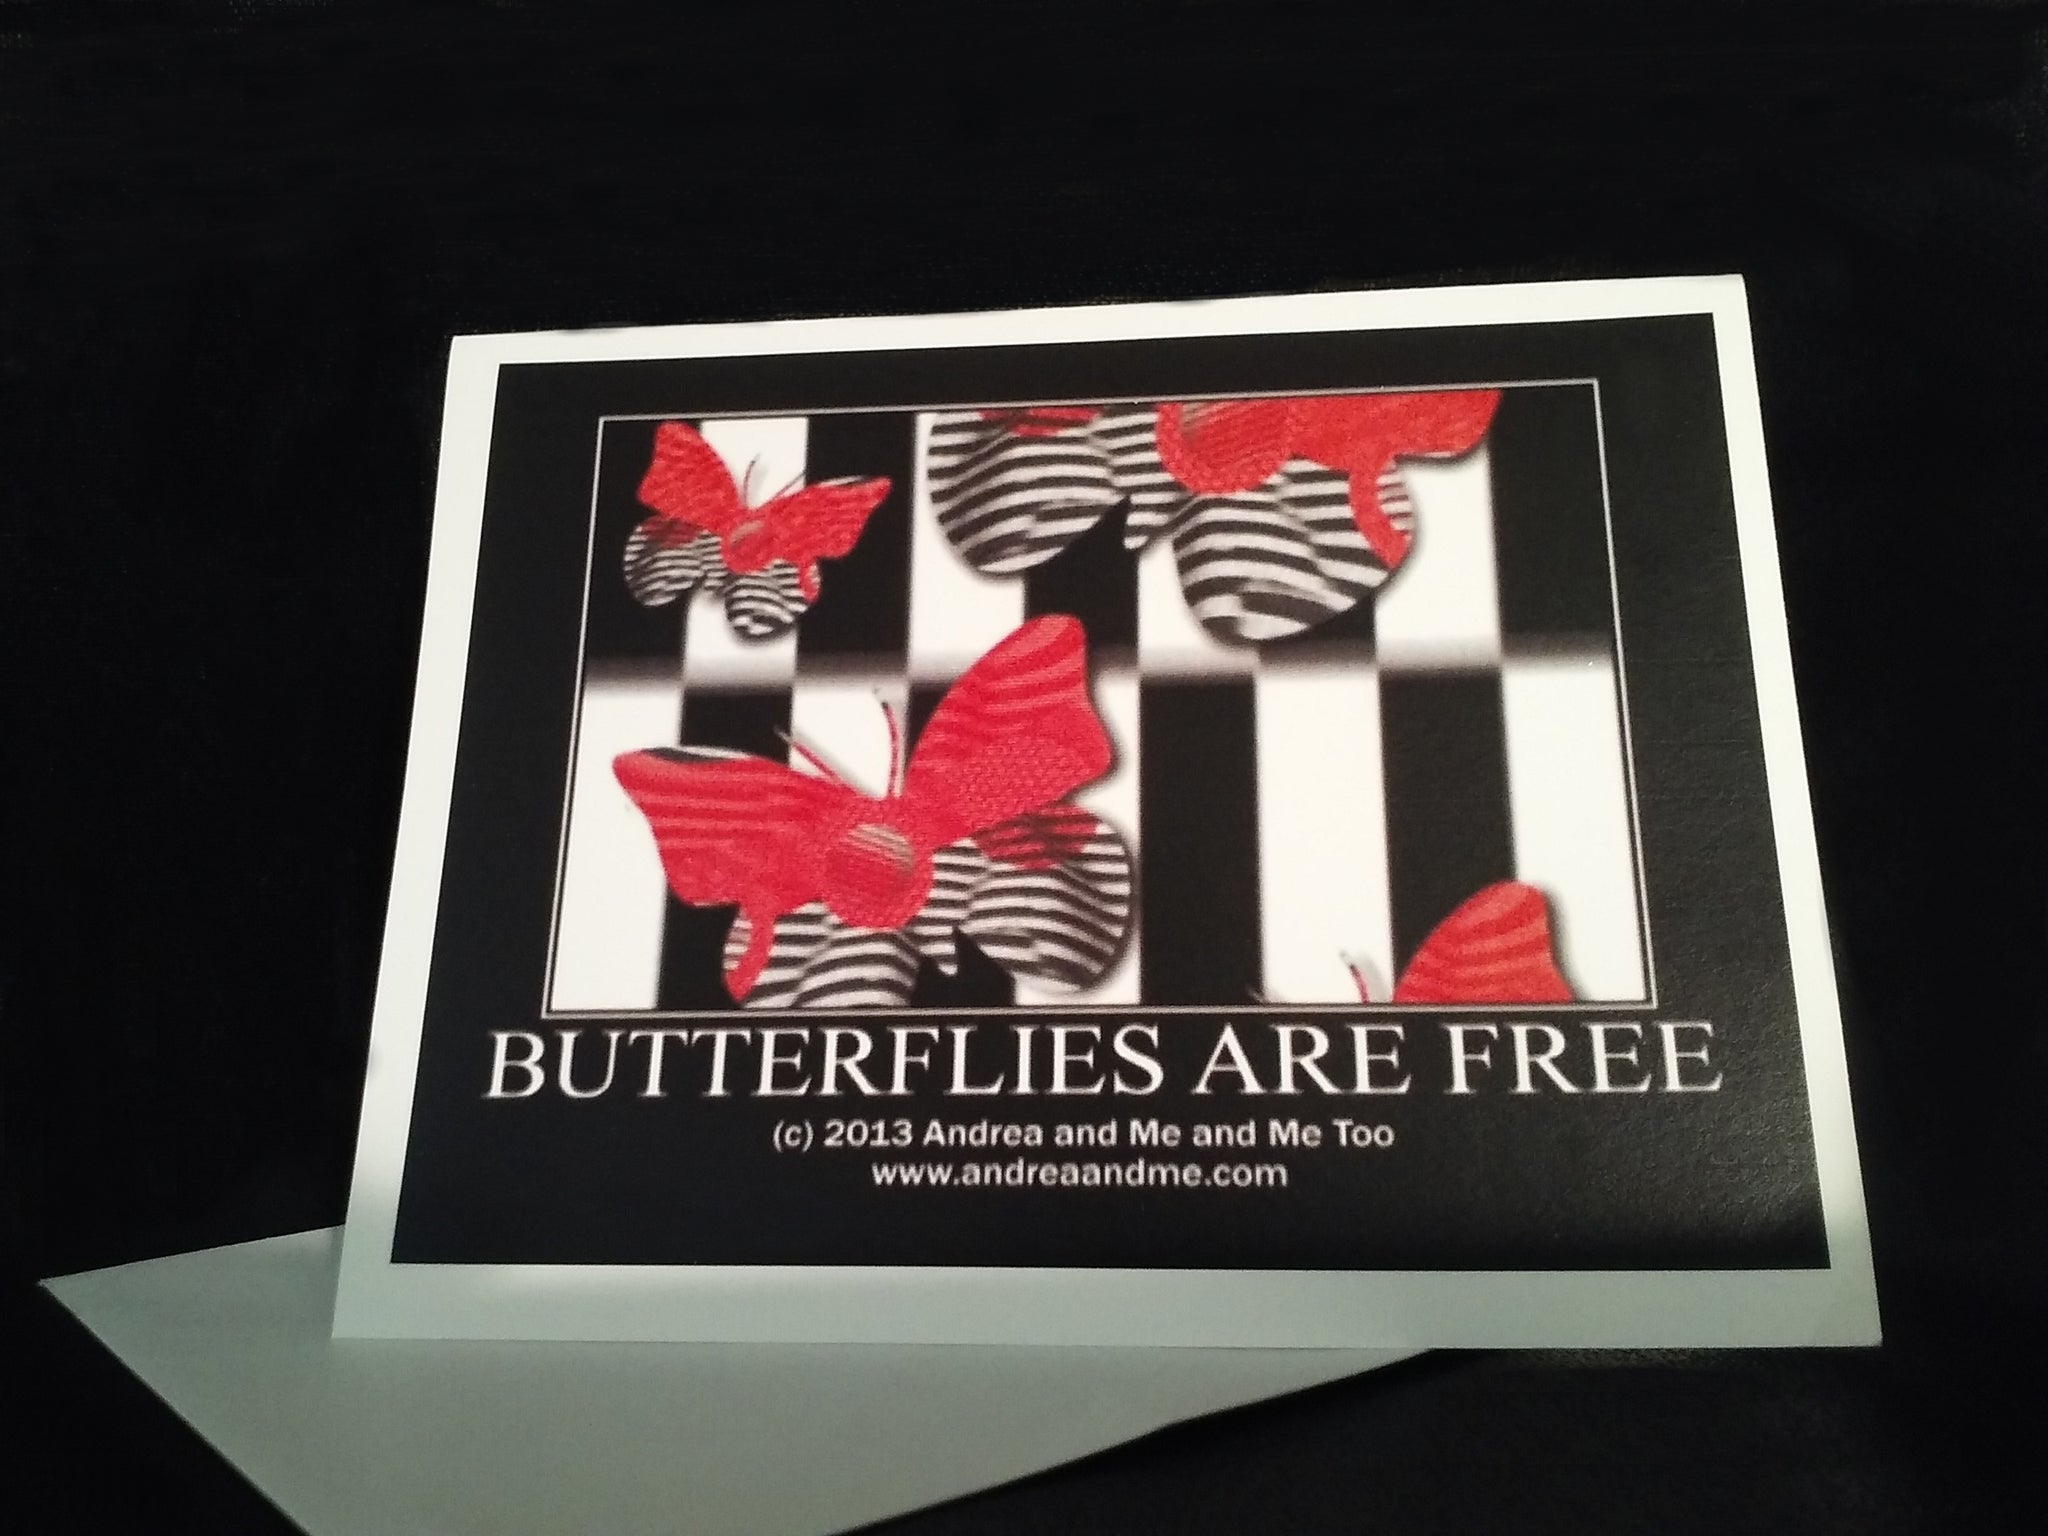 Red and Black Striped Butterflies are Free in bold letters. The butterflies are black and white striped with red top, These note/art cards greeting cards are blank inside with 10 envelopes and 10 cards from Andrea and Me and Me too at www.andreaandme.com